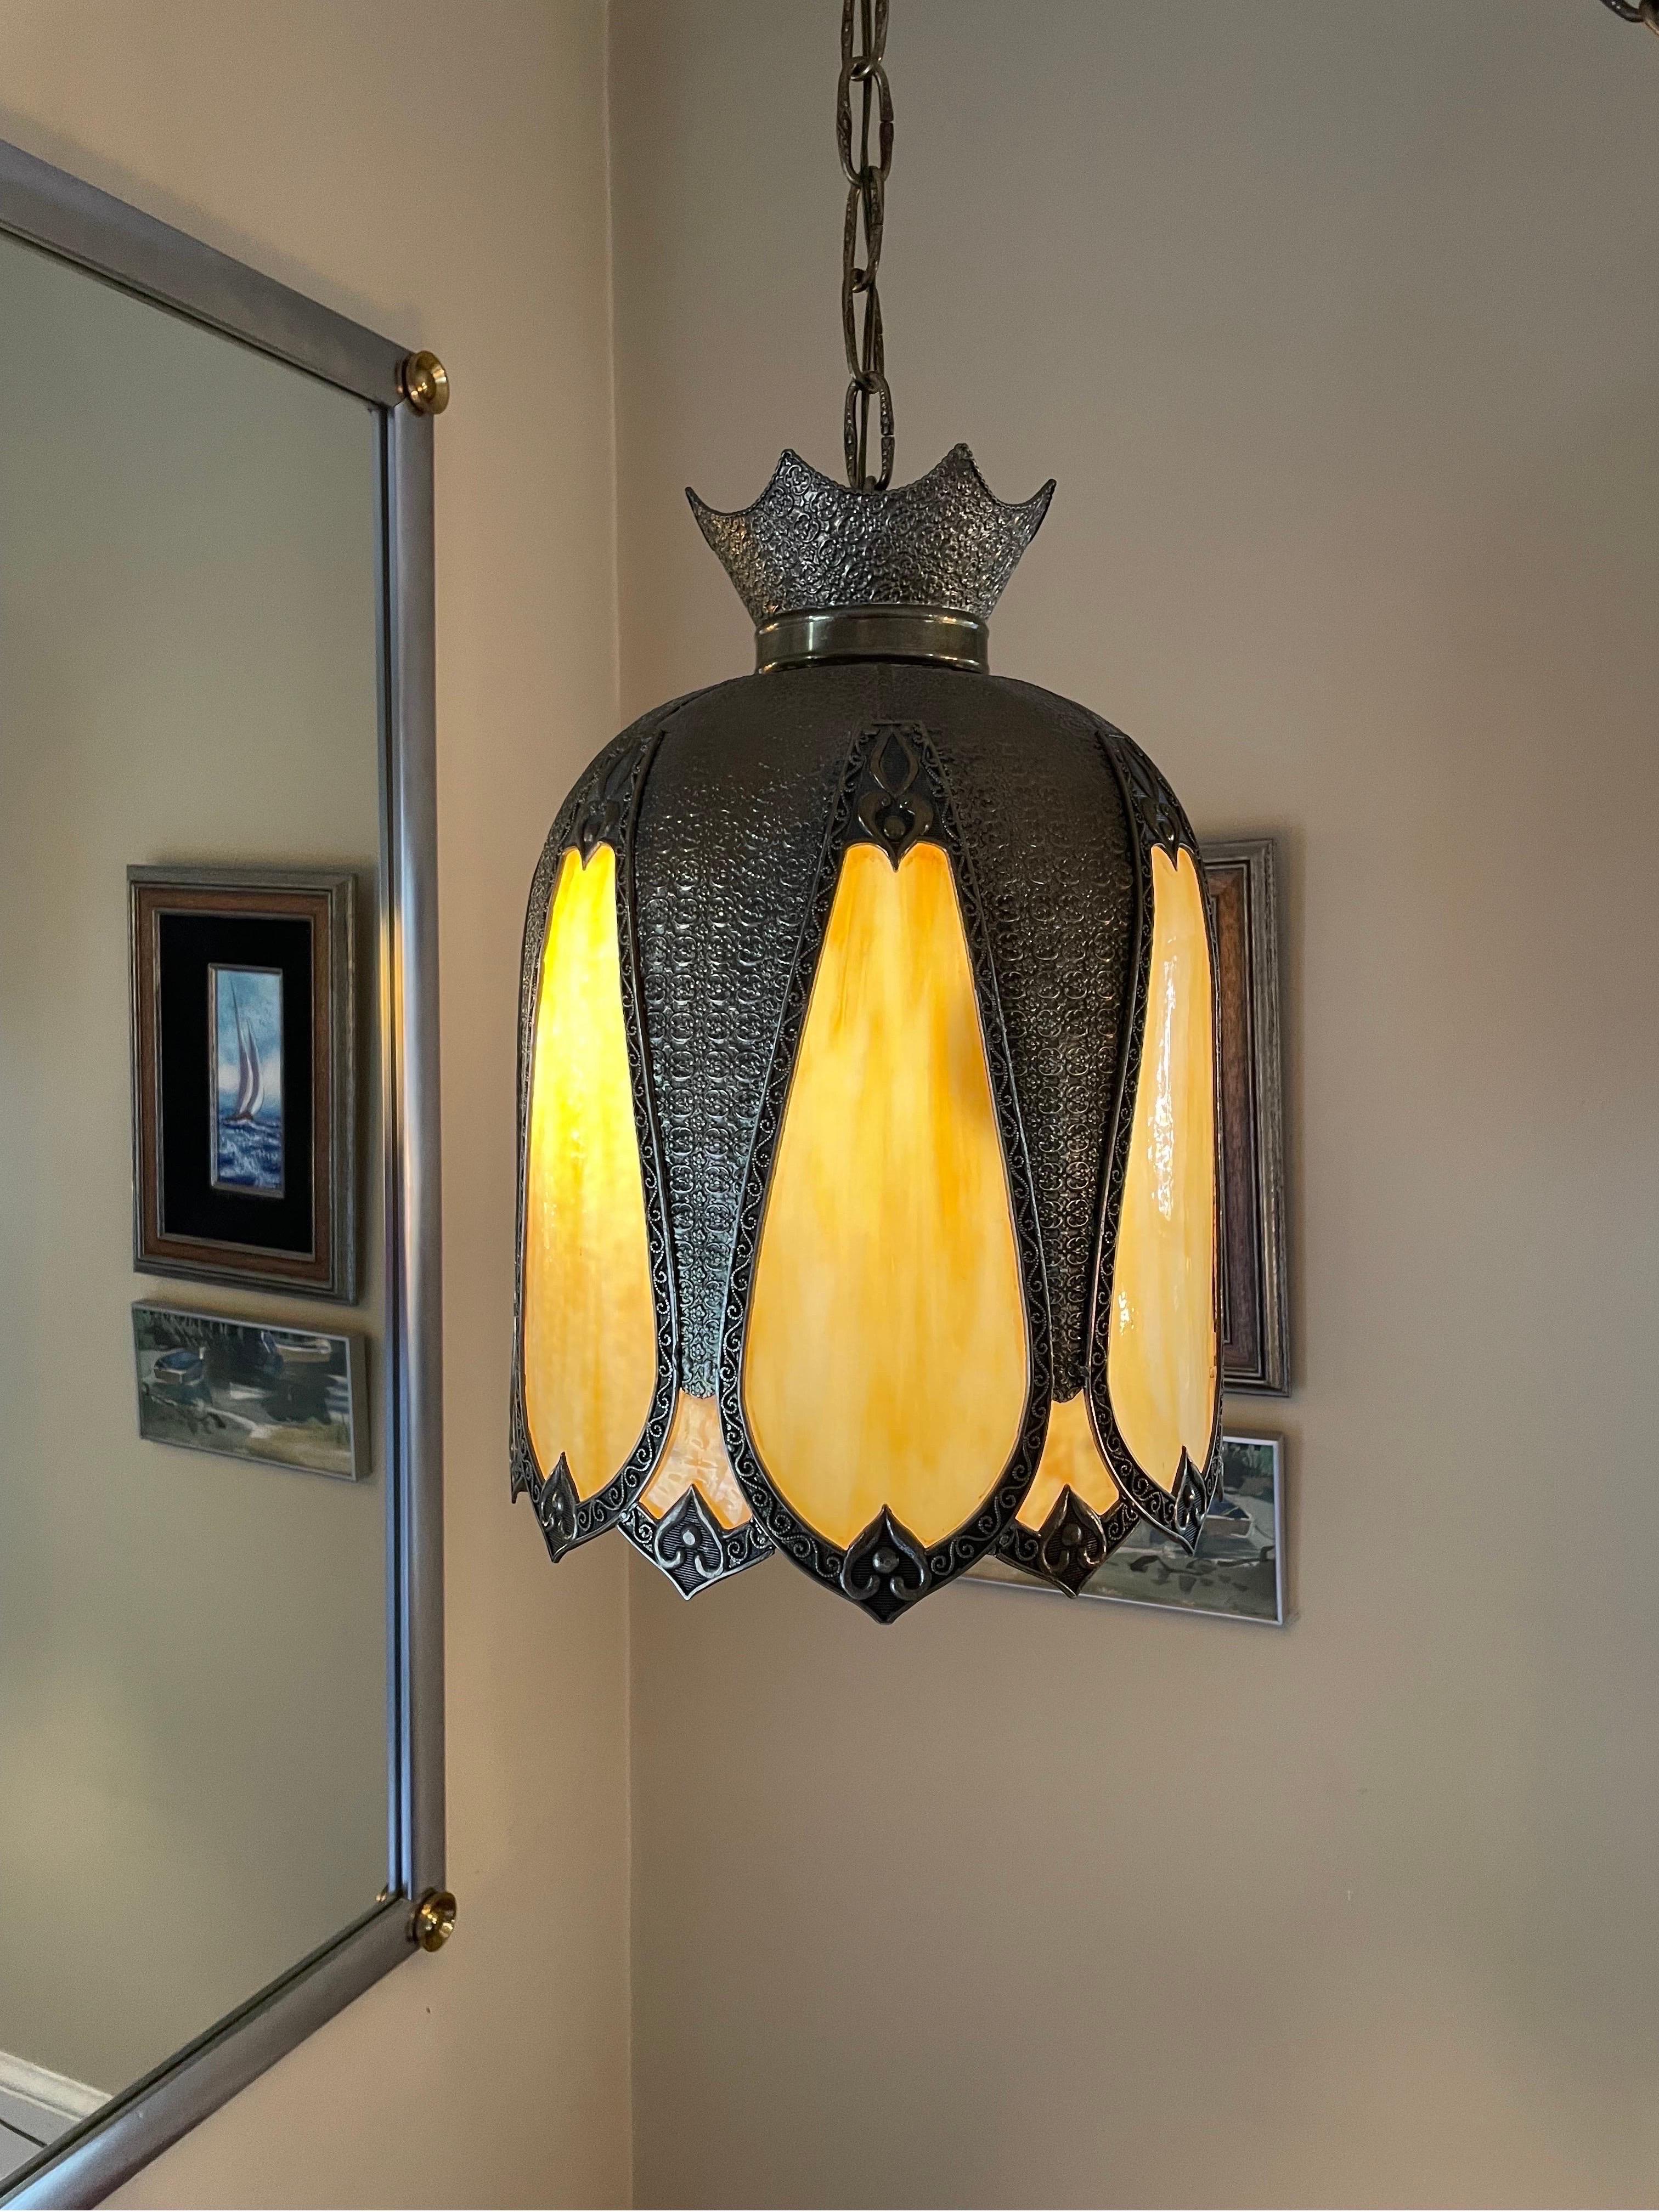 Slag glass and bronze swag pendant. Great proportion and balance. Nicely patinated. 3 Bulb function on individual pull chains for controlled ambiance and color control of slag panes. 11' Chain for versatile placement. Lamp Fashion MFG. Co.